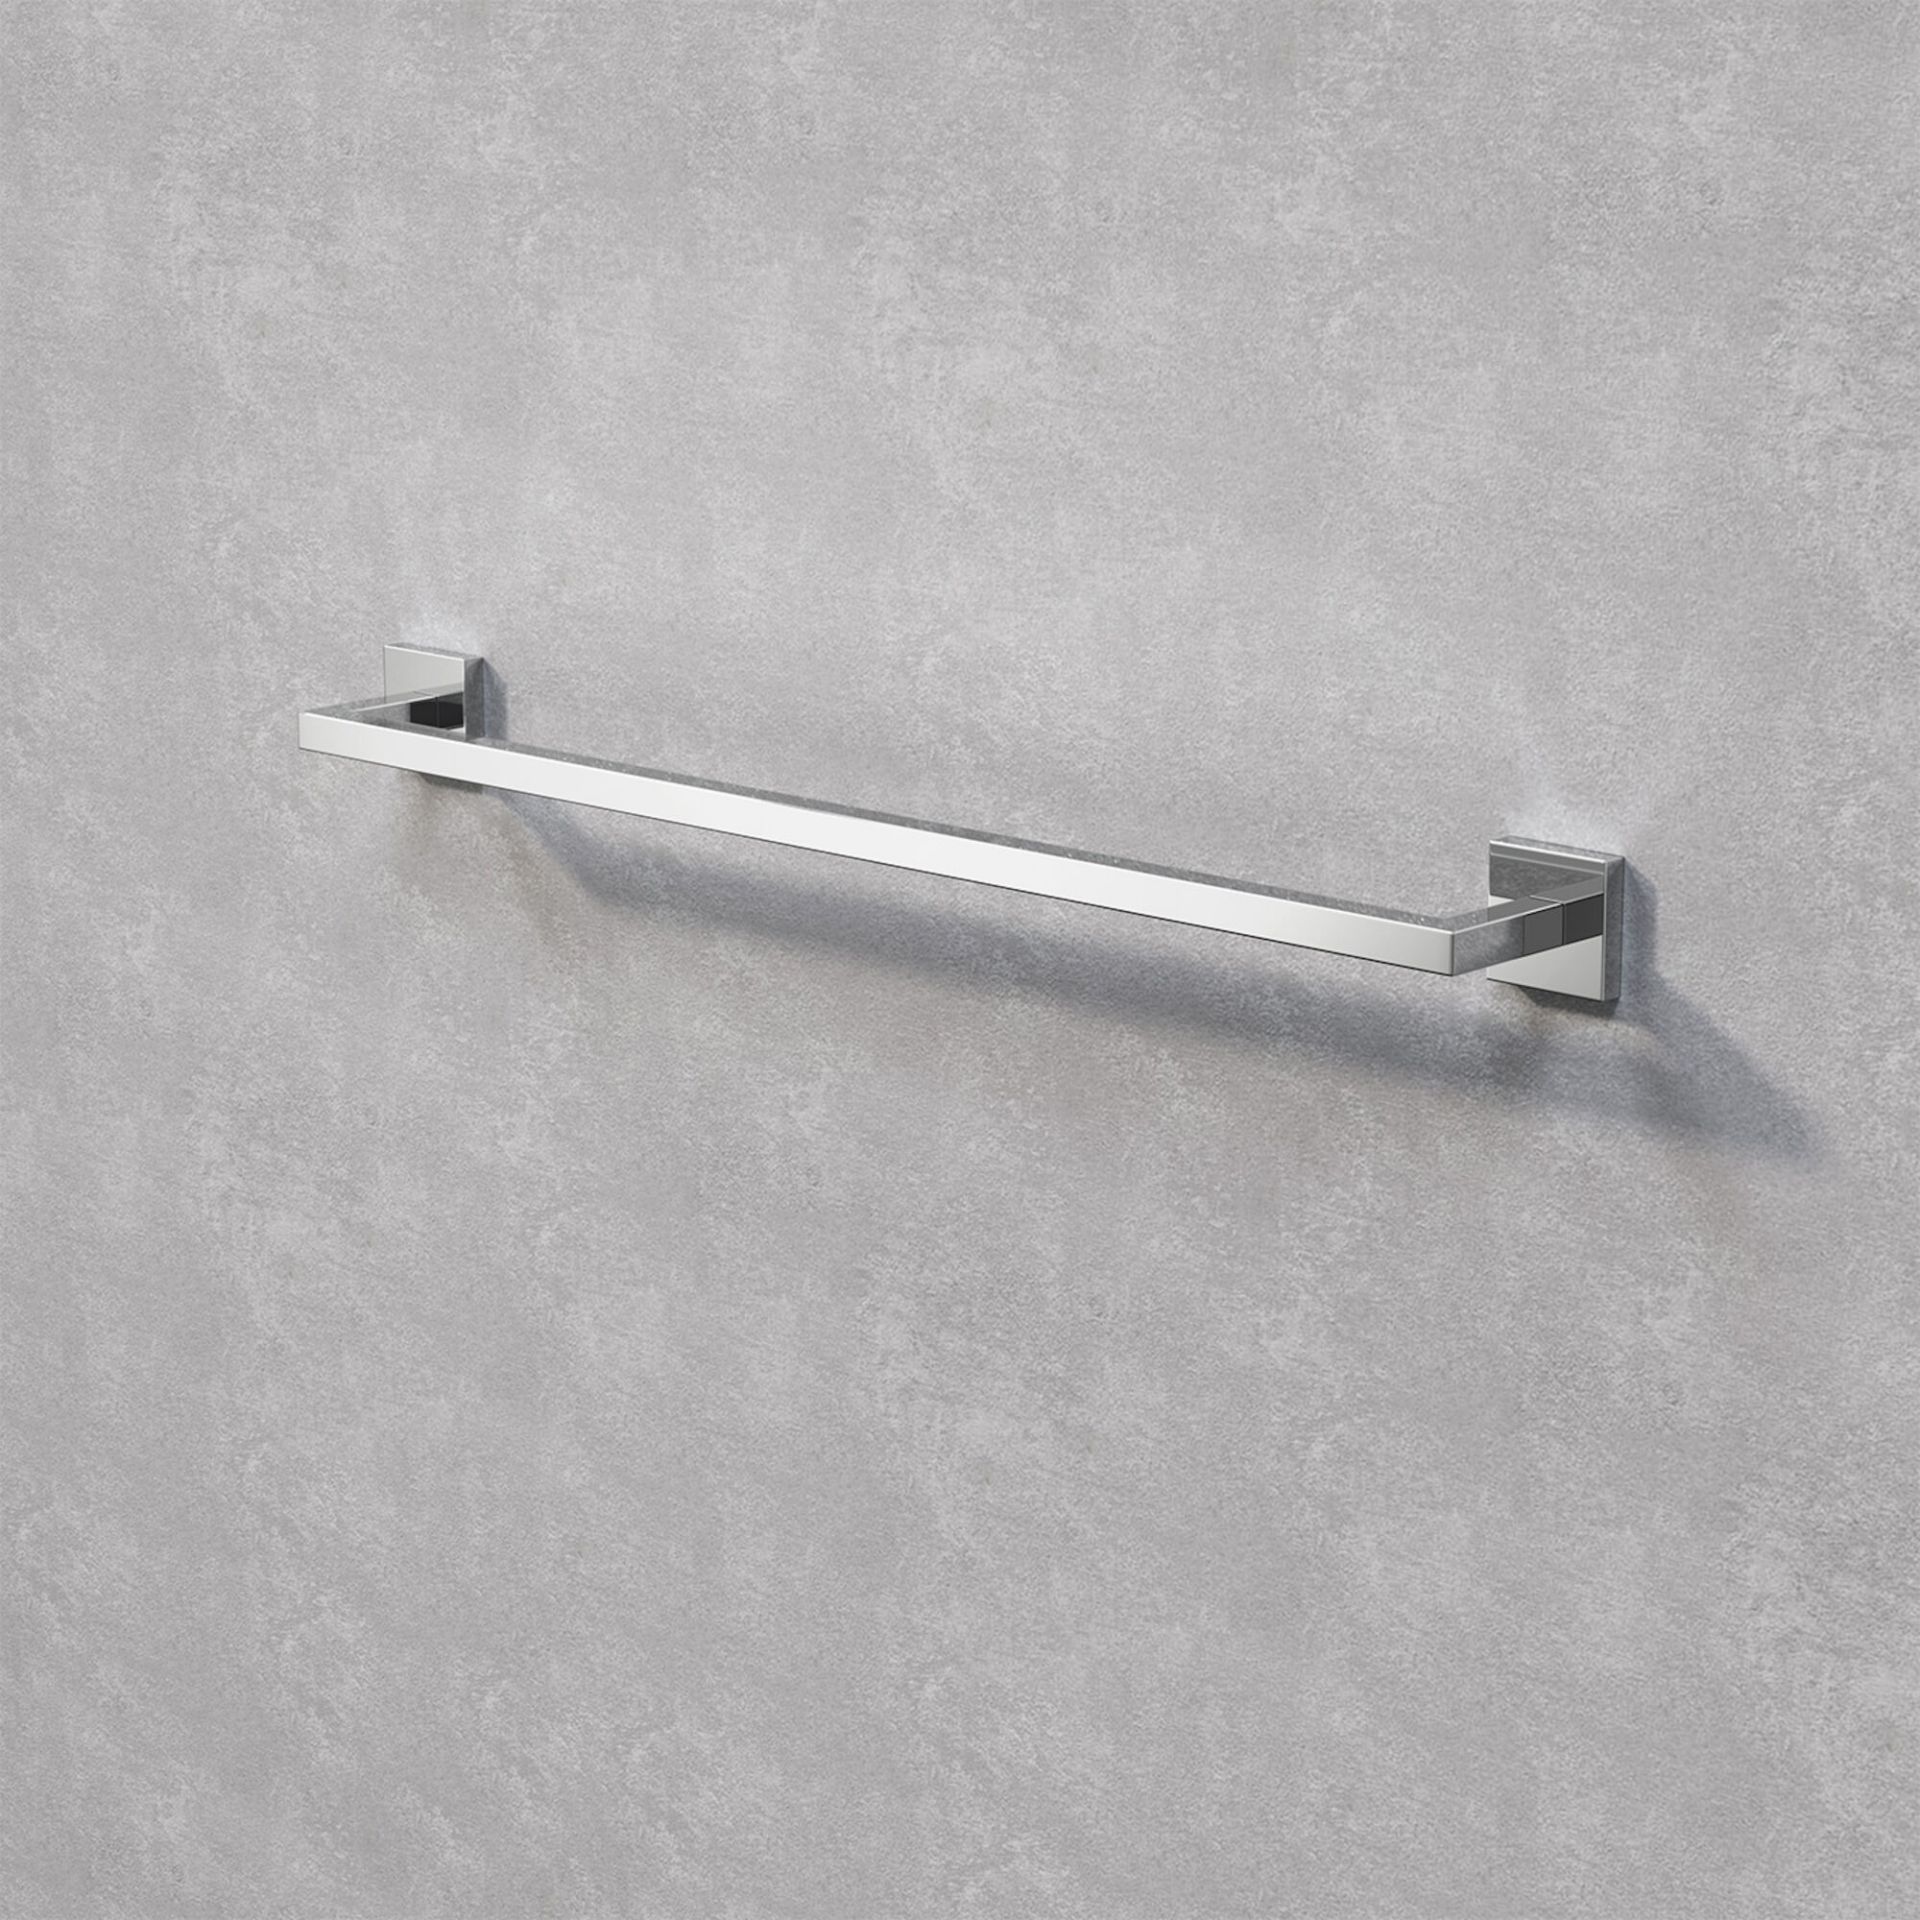 (PM1020) Jesmond Towel Rail Finishes your bathroom with a little extra functionality and style...